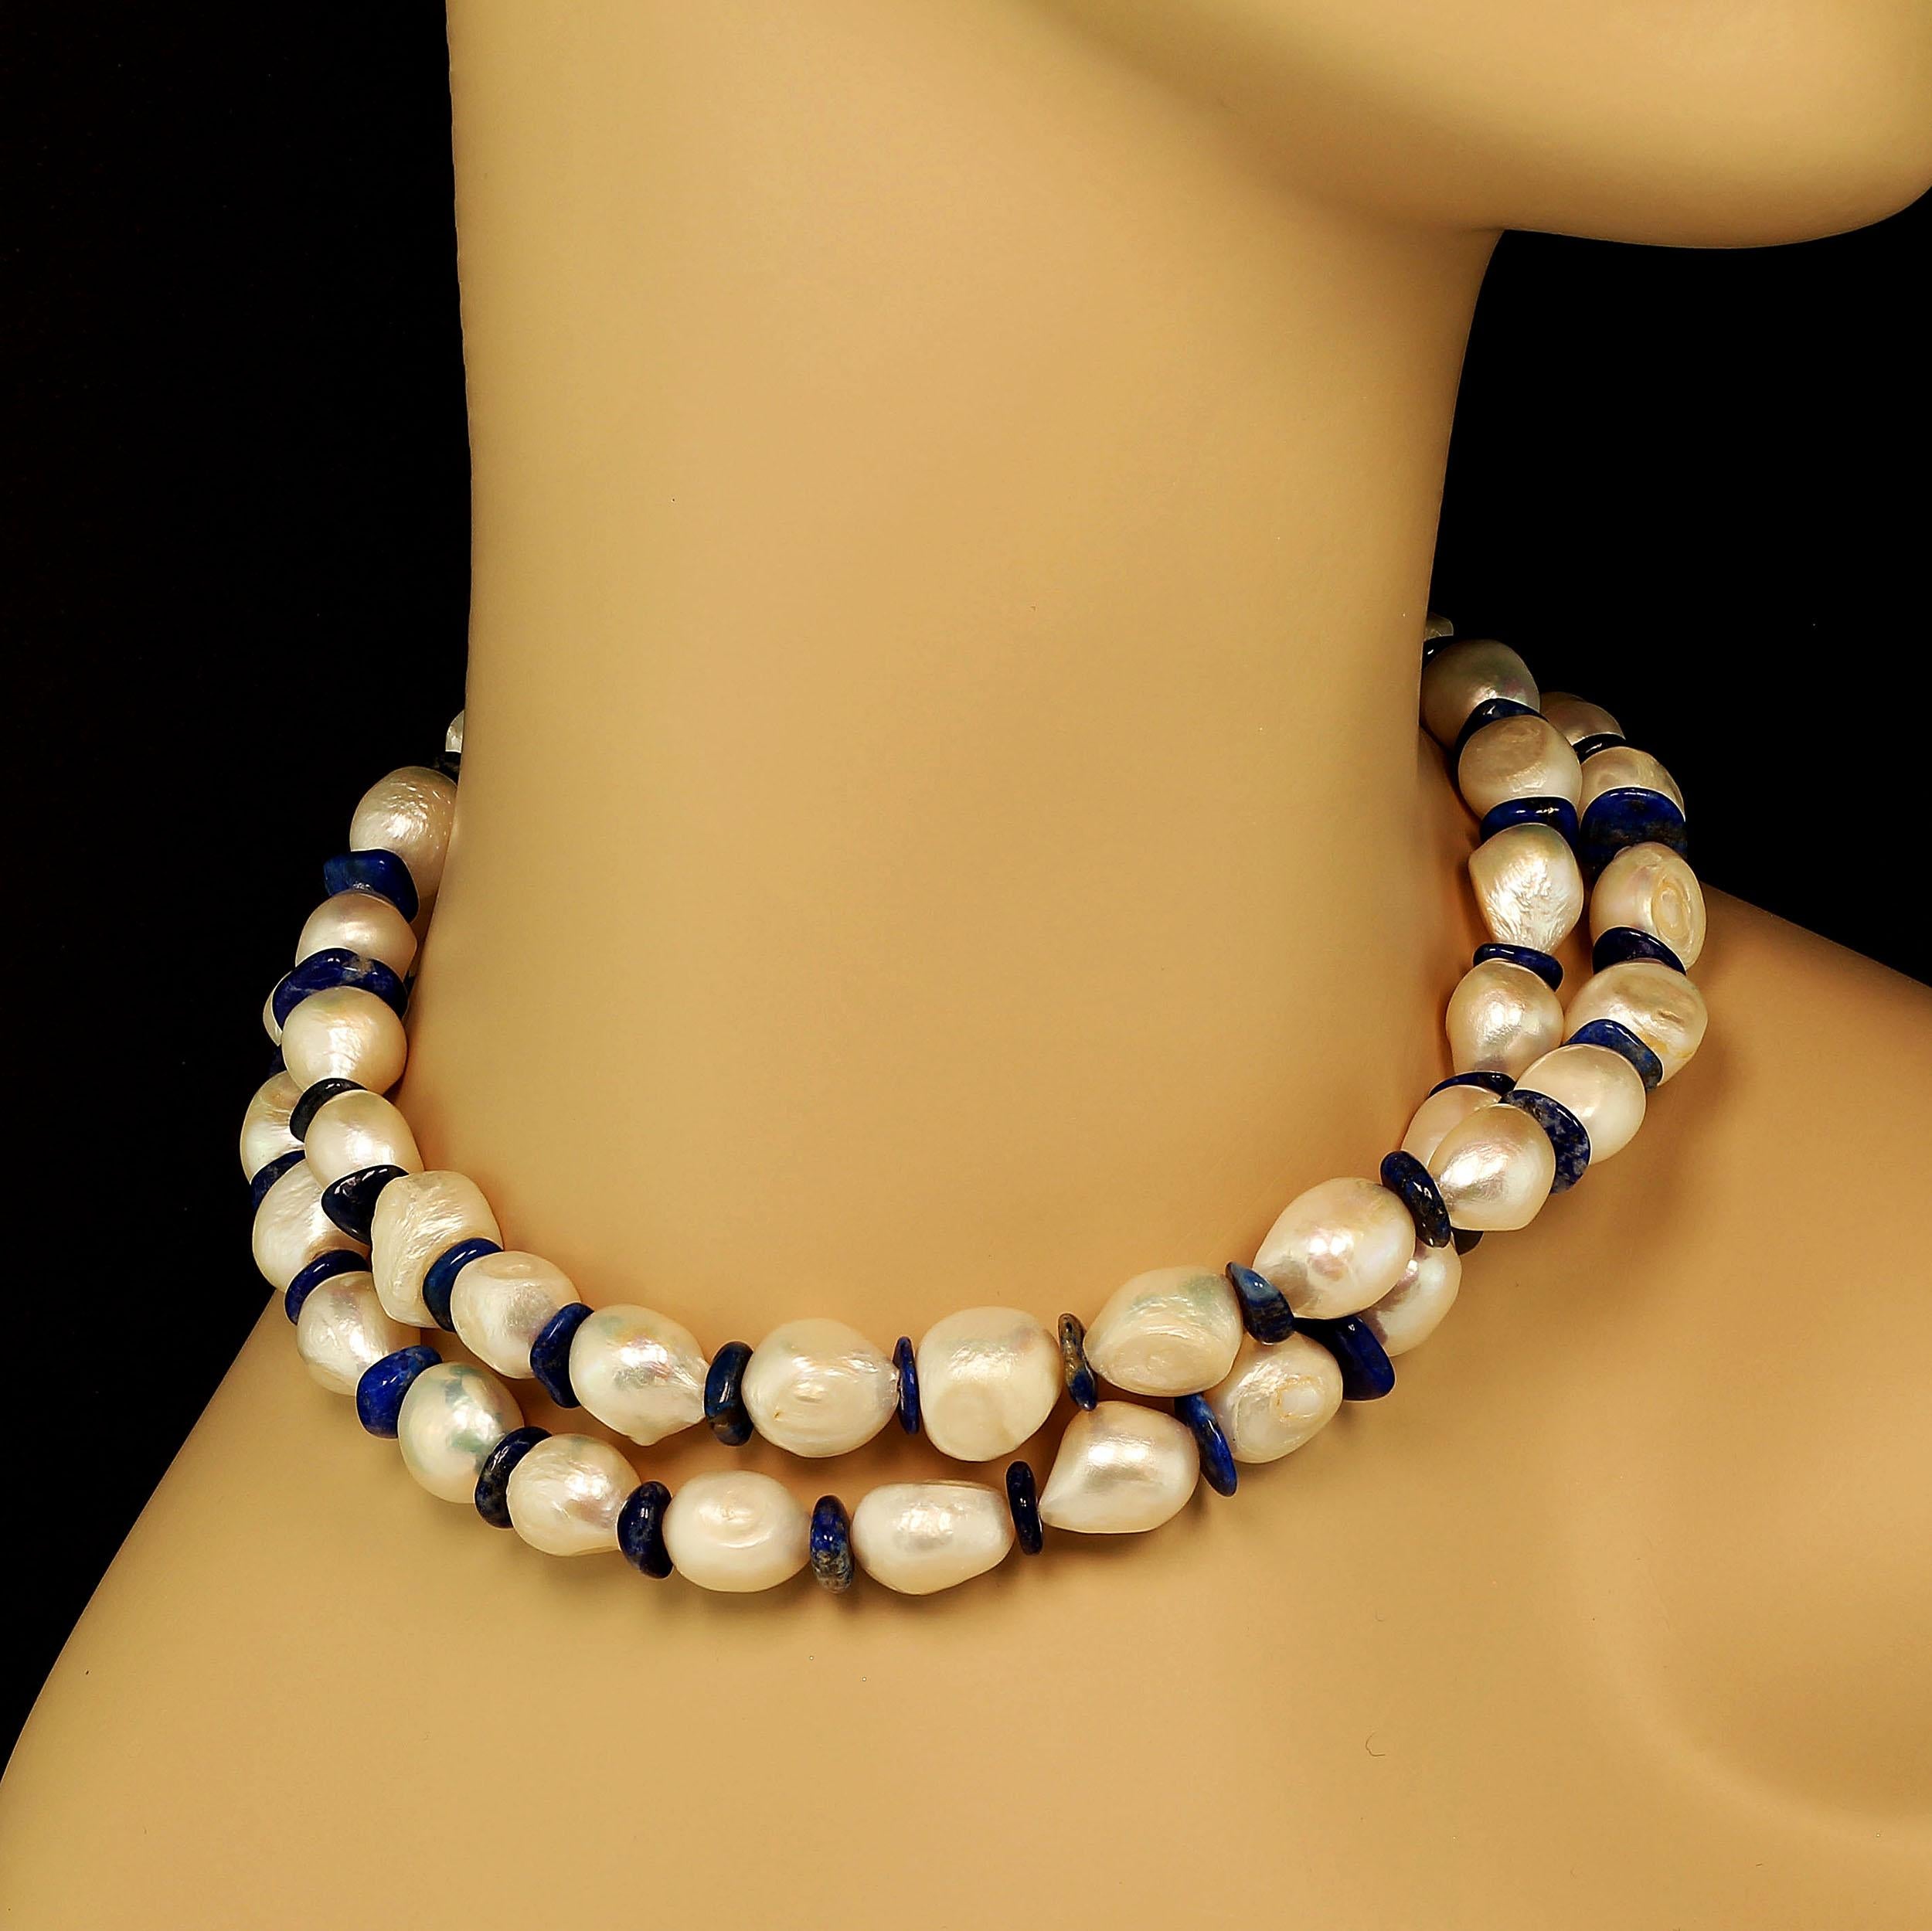 Artisan AJD Freshwater Pearl Necklace with Lapis Lazuli June Birthstone